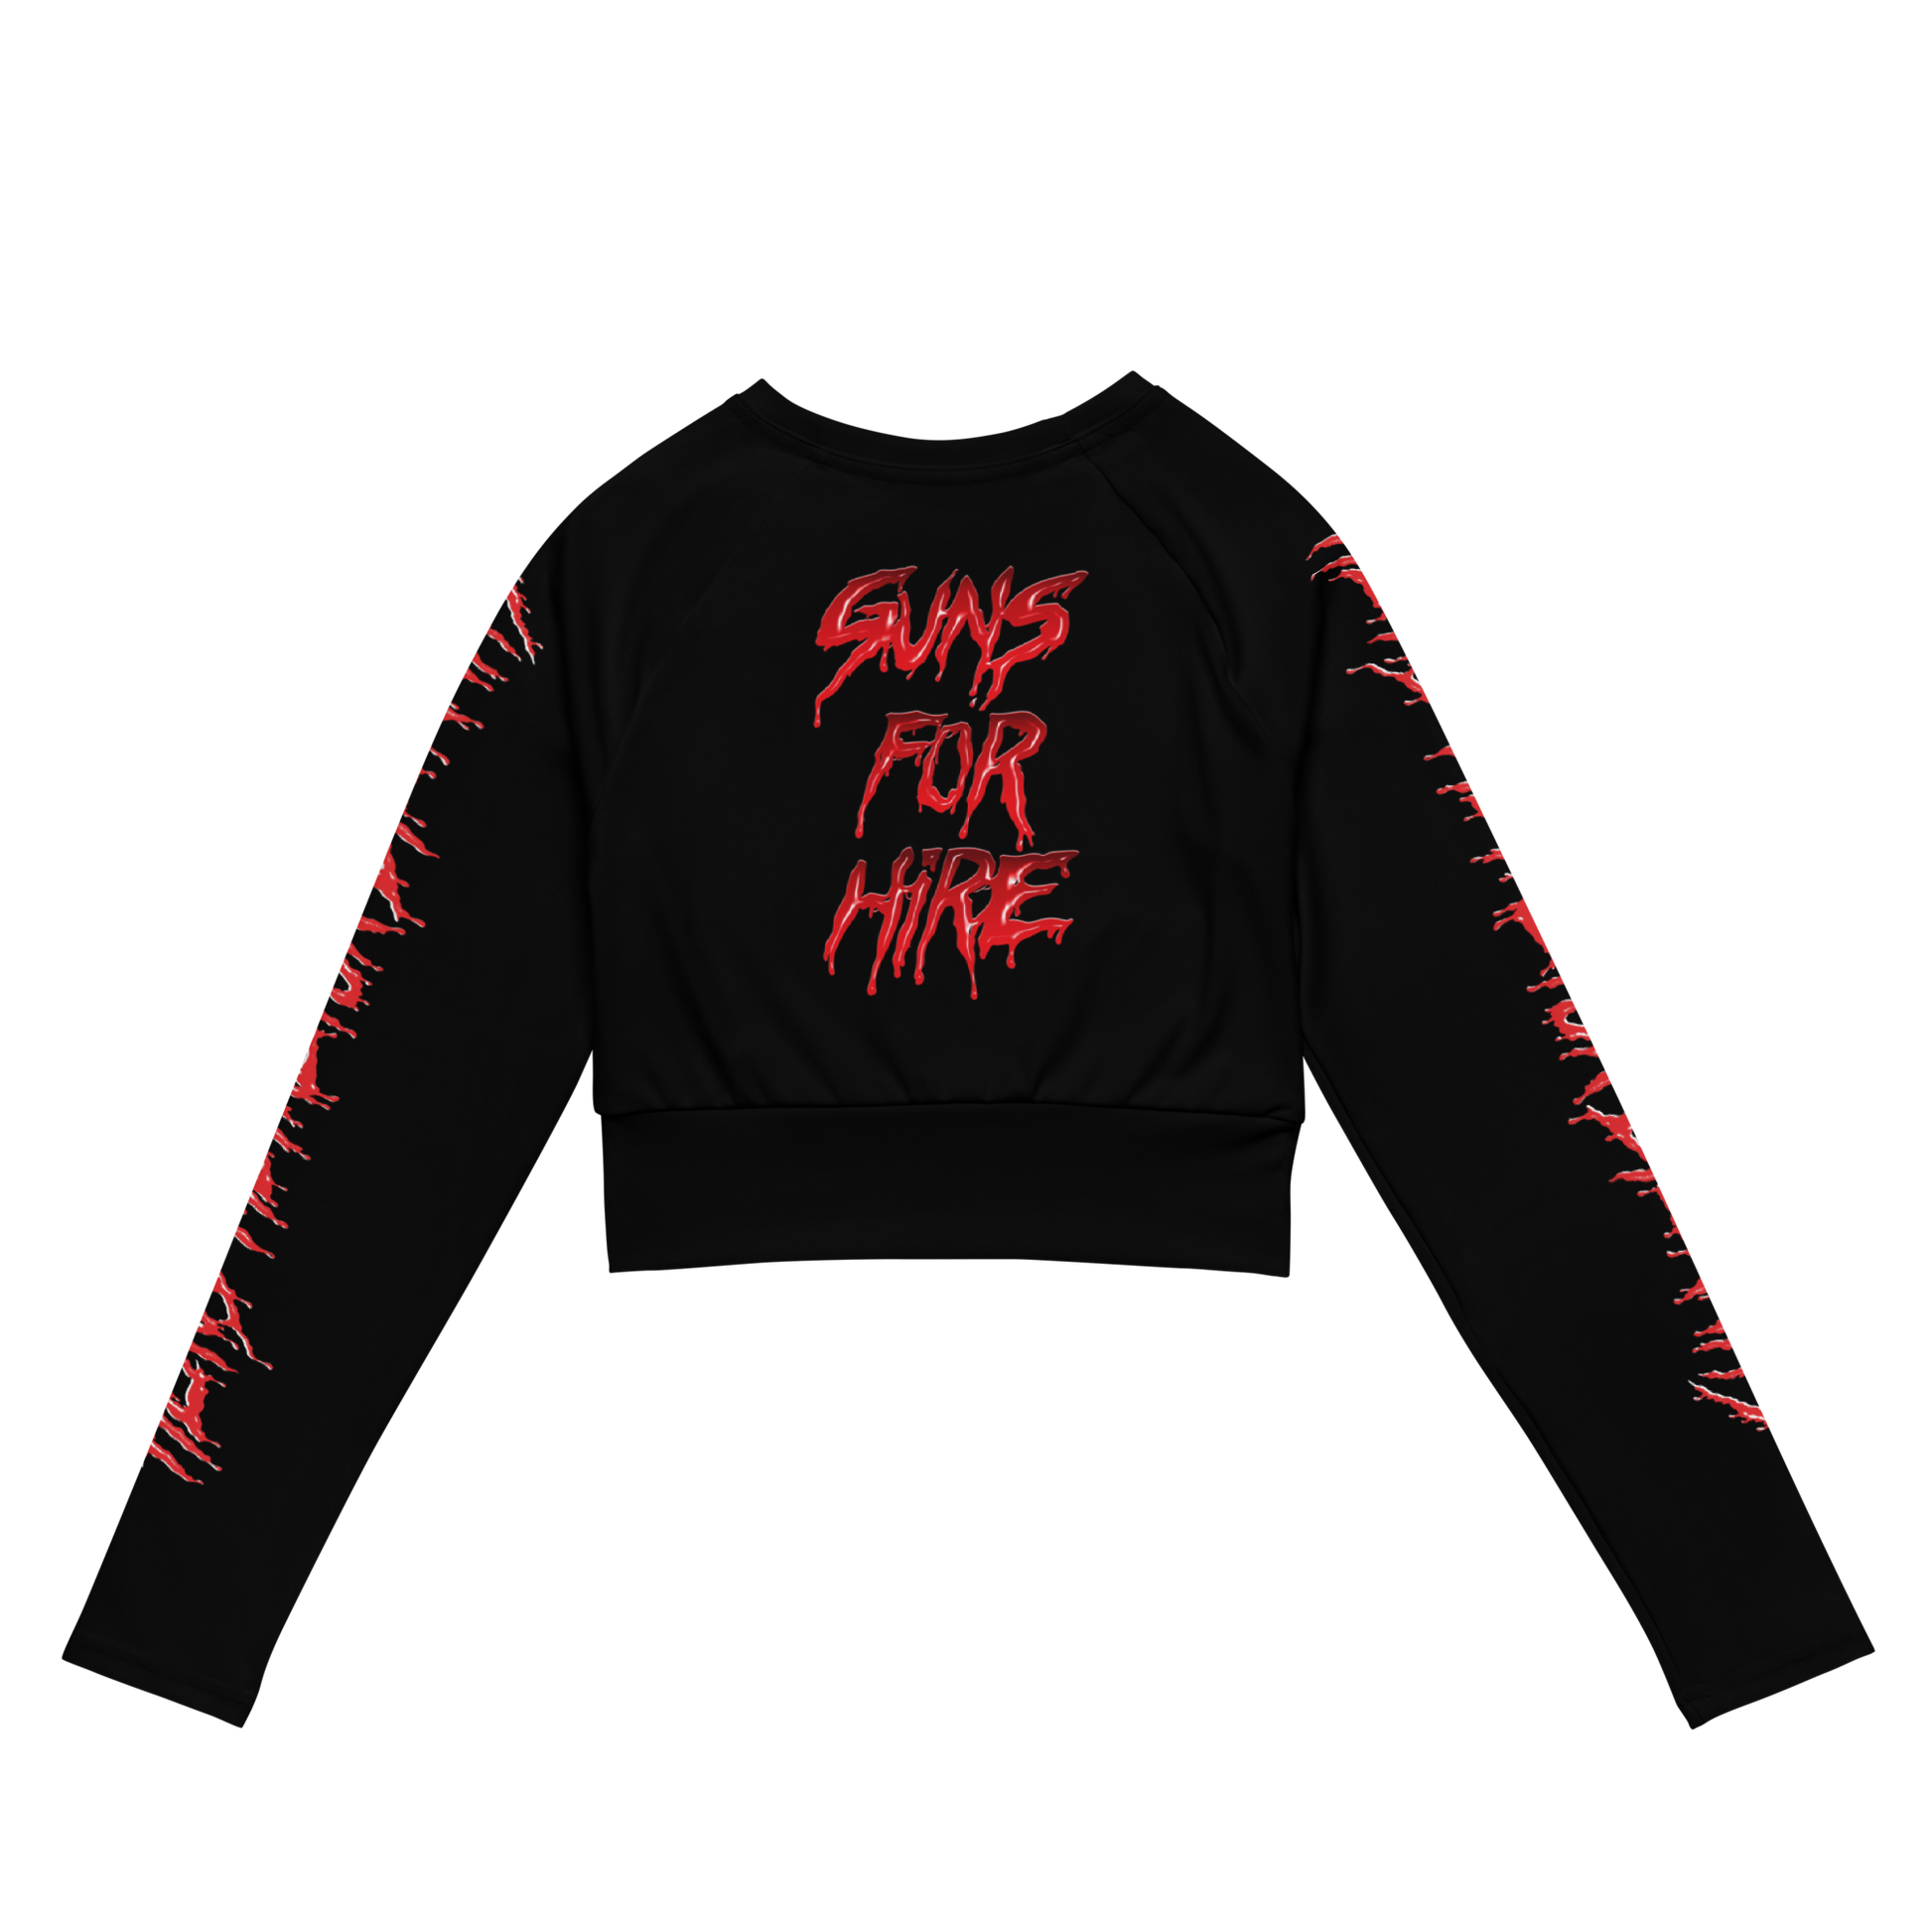 Tailgunner Guns For Hire official licensed long sleeve crop top by Metal Mistress